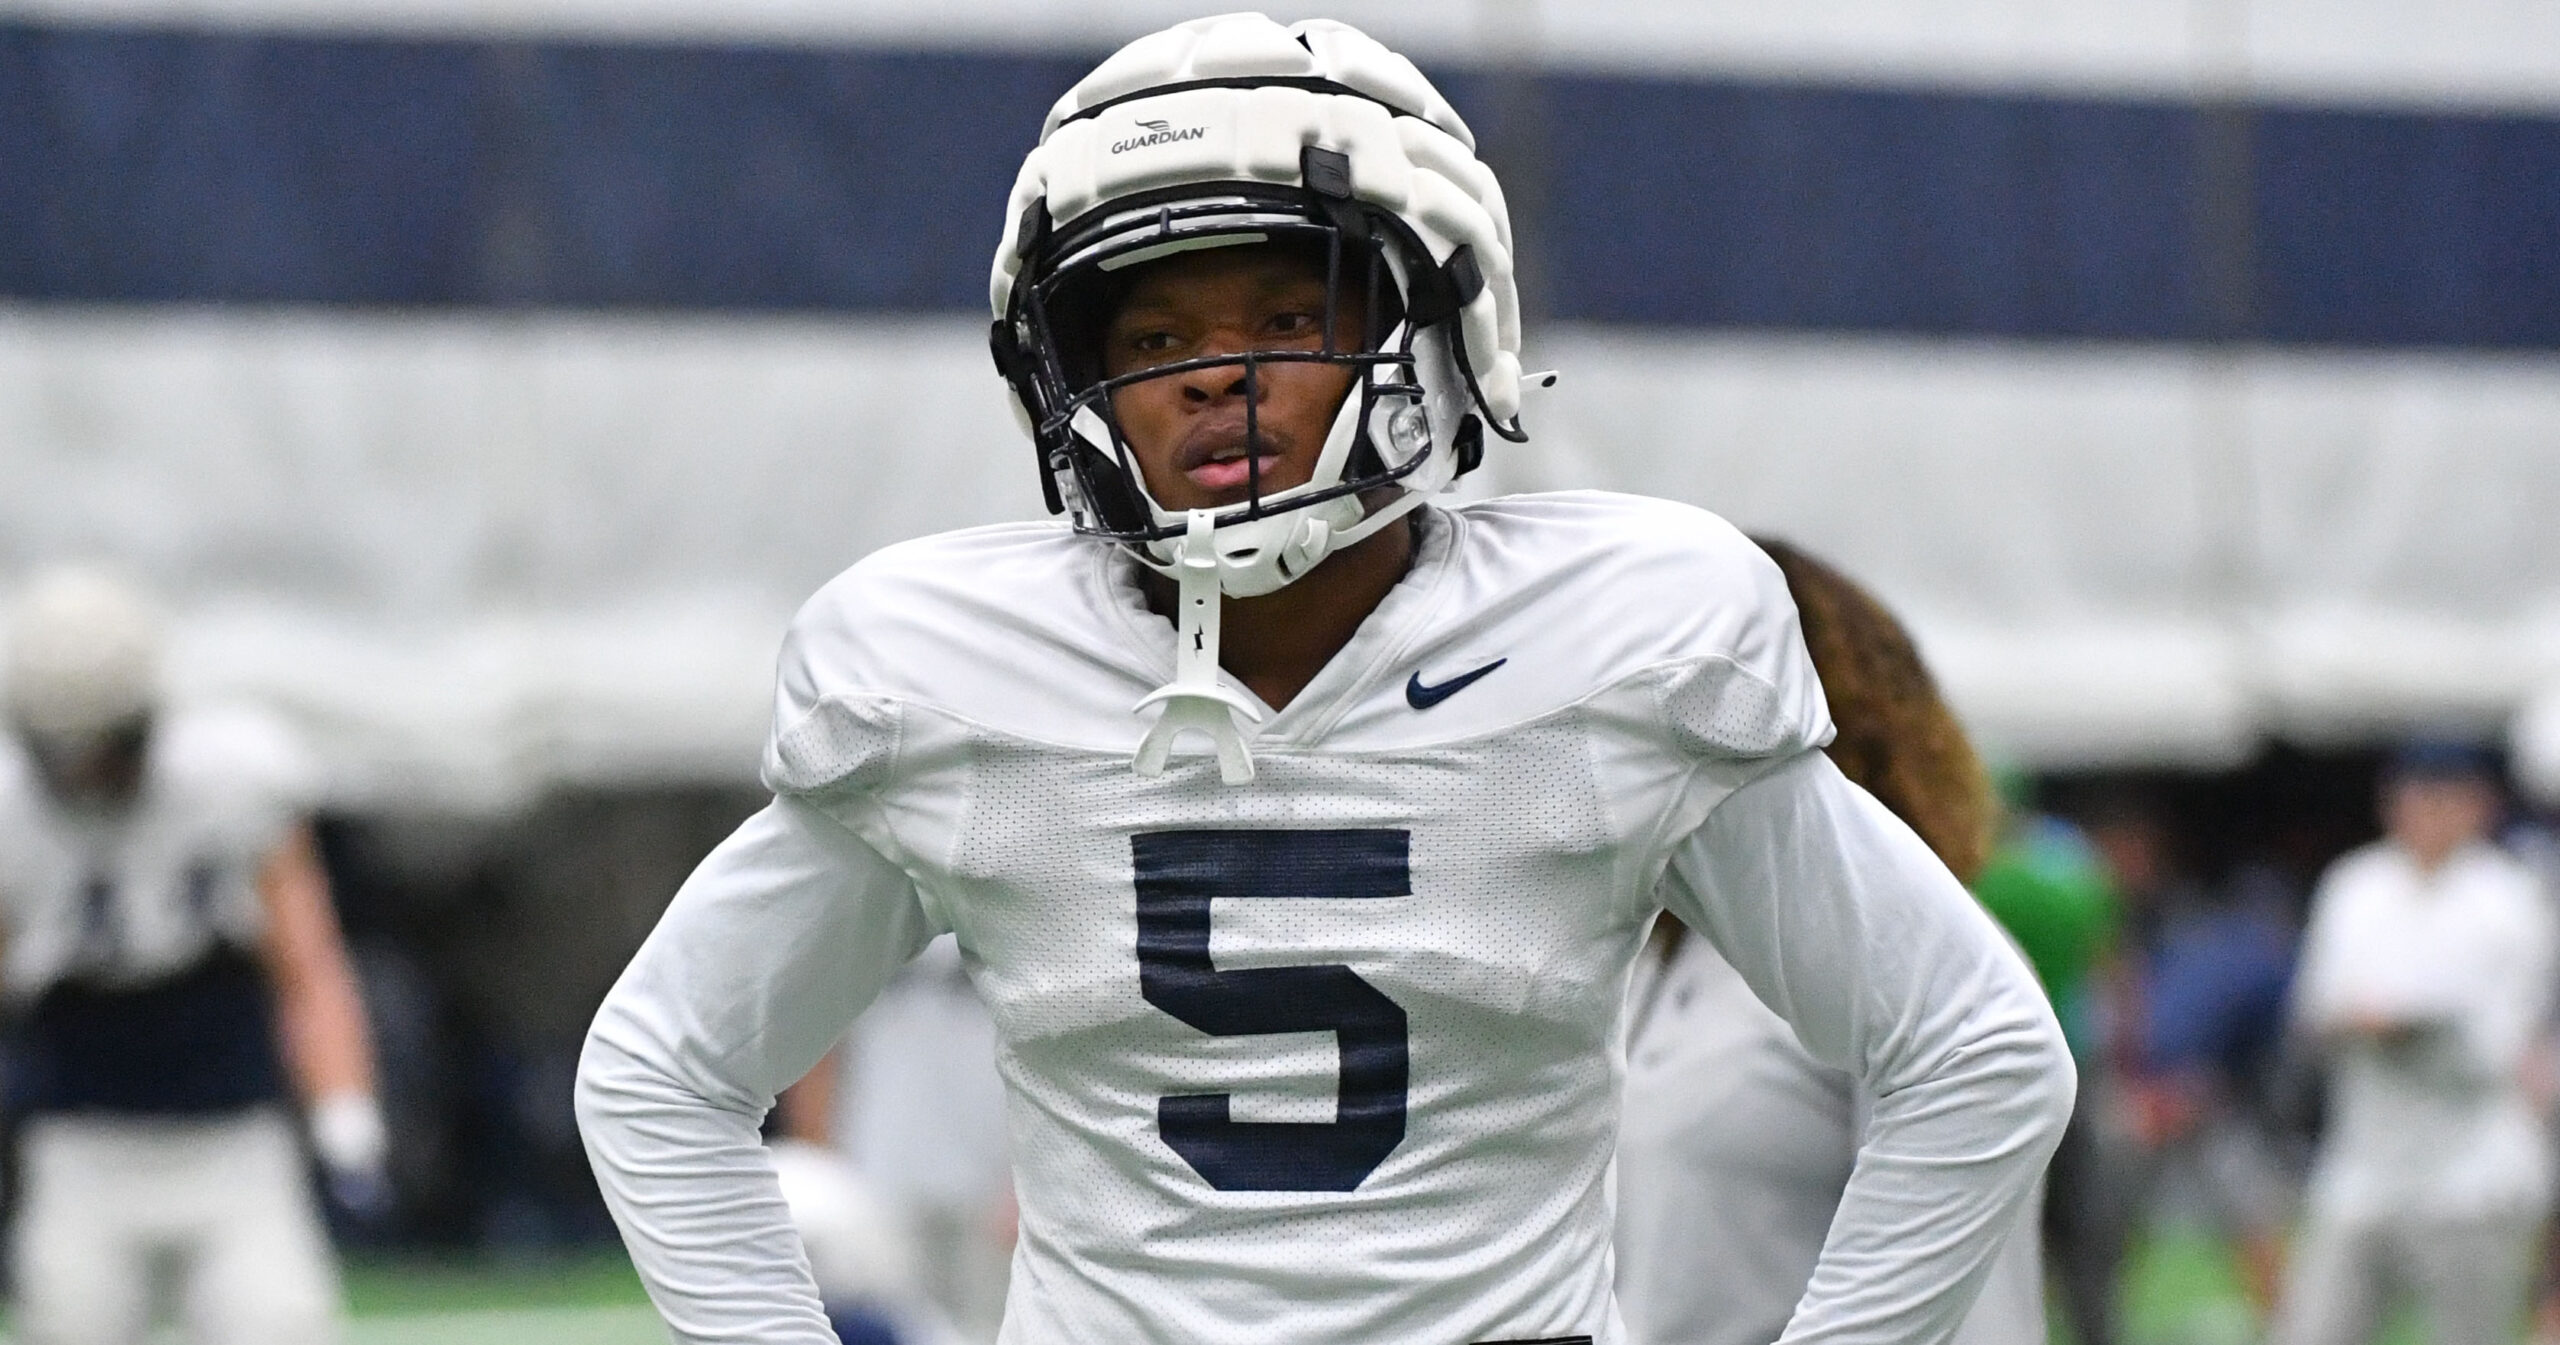 Limited but impactful, analyzing Penn State transfer portal approach On3